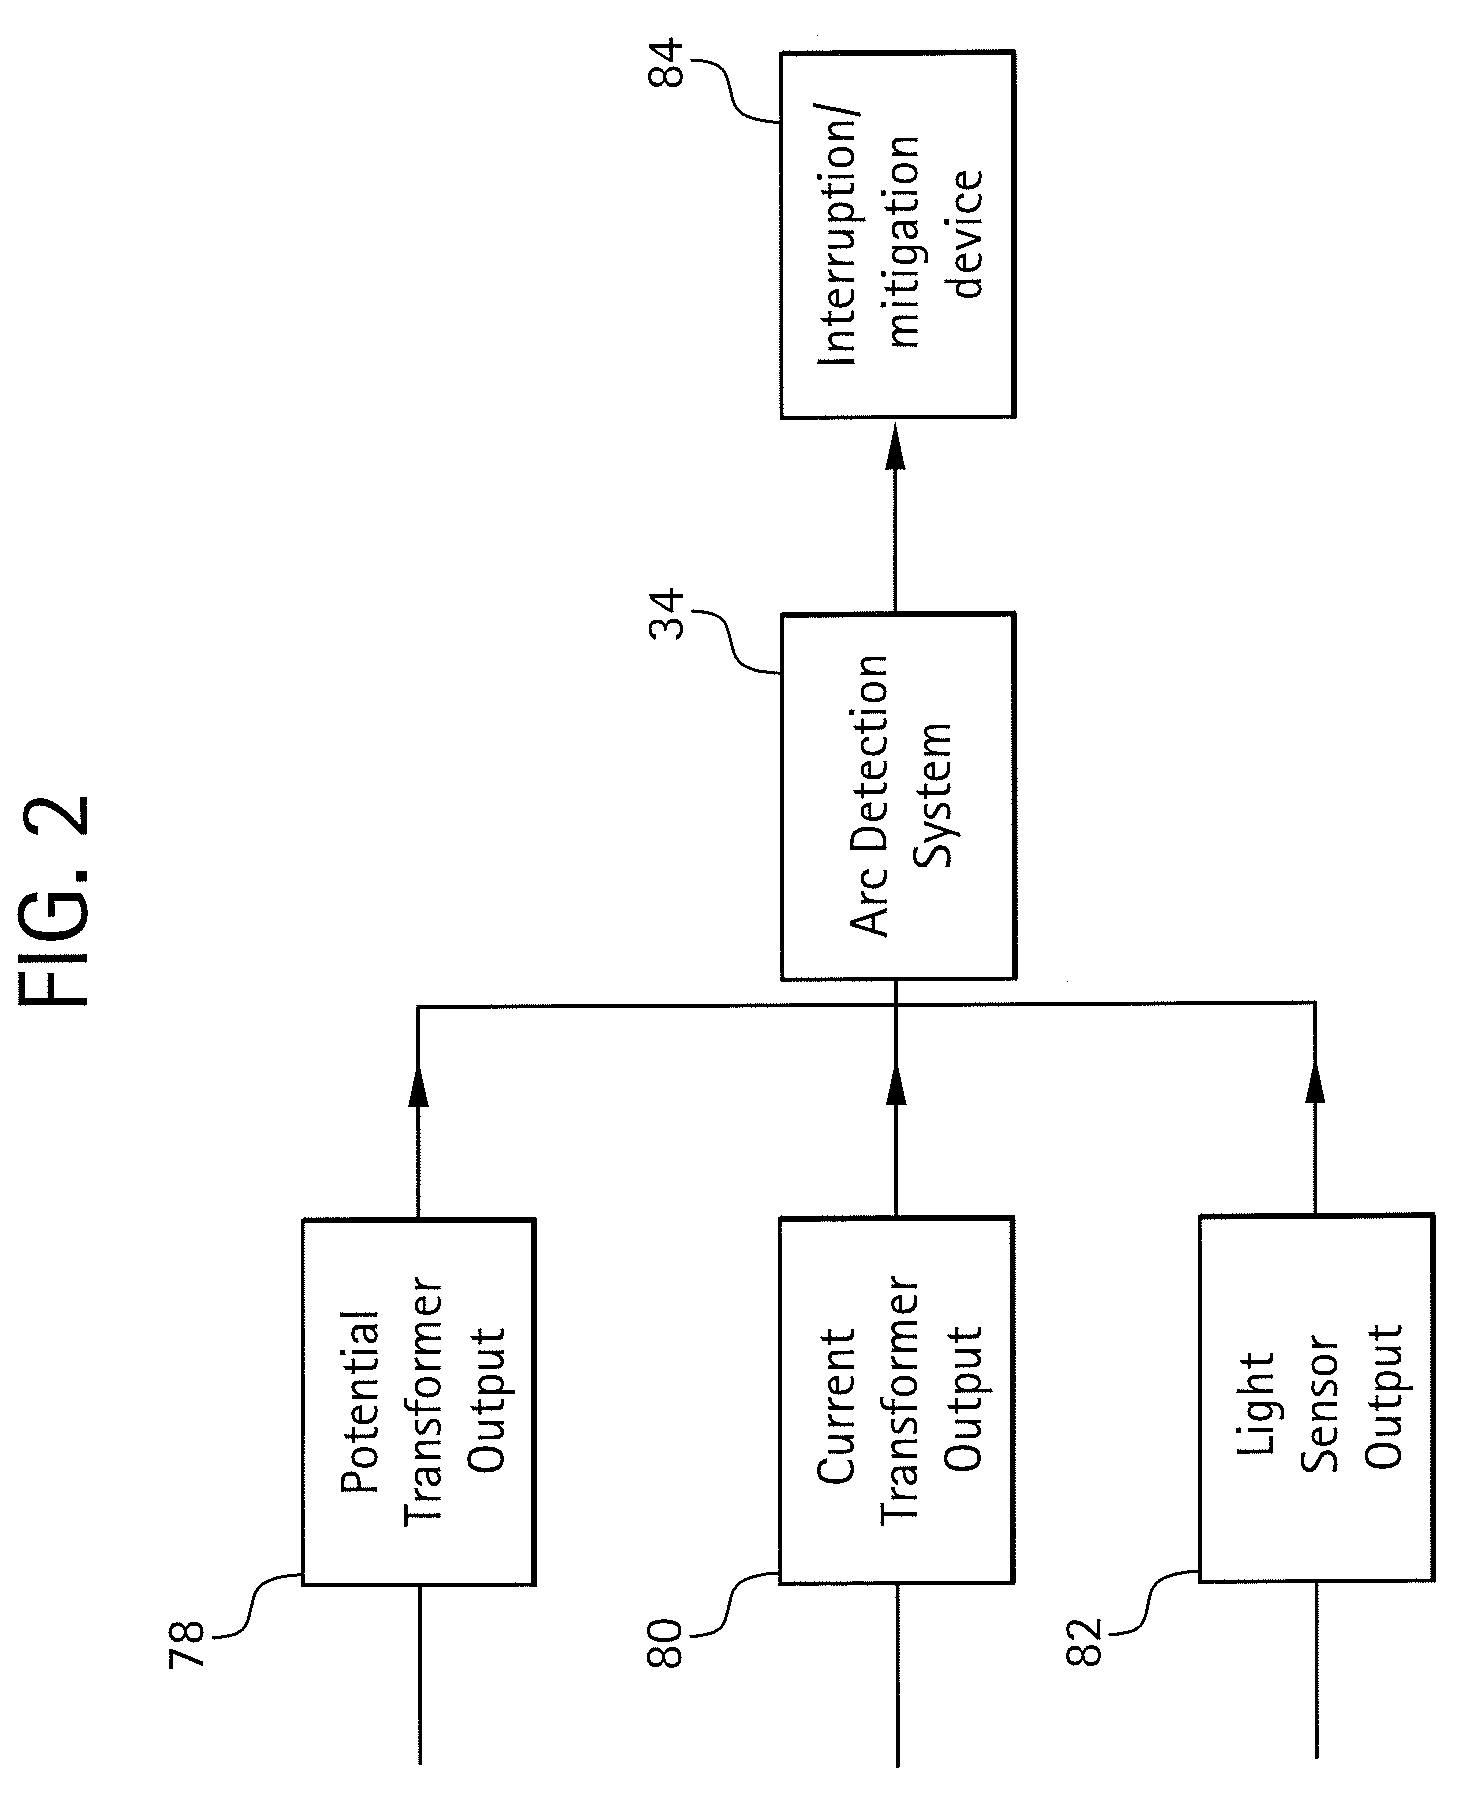 Arc flash detection system, apparatus and method